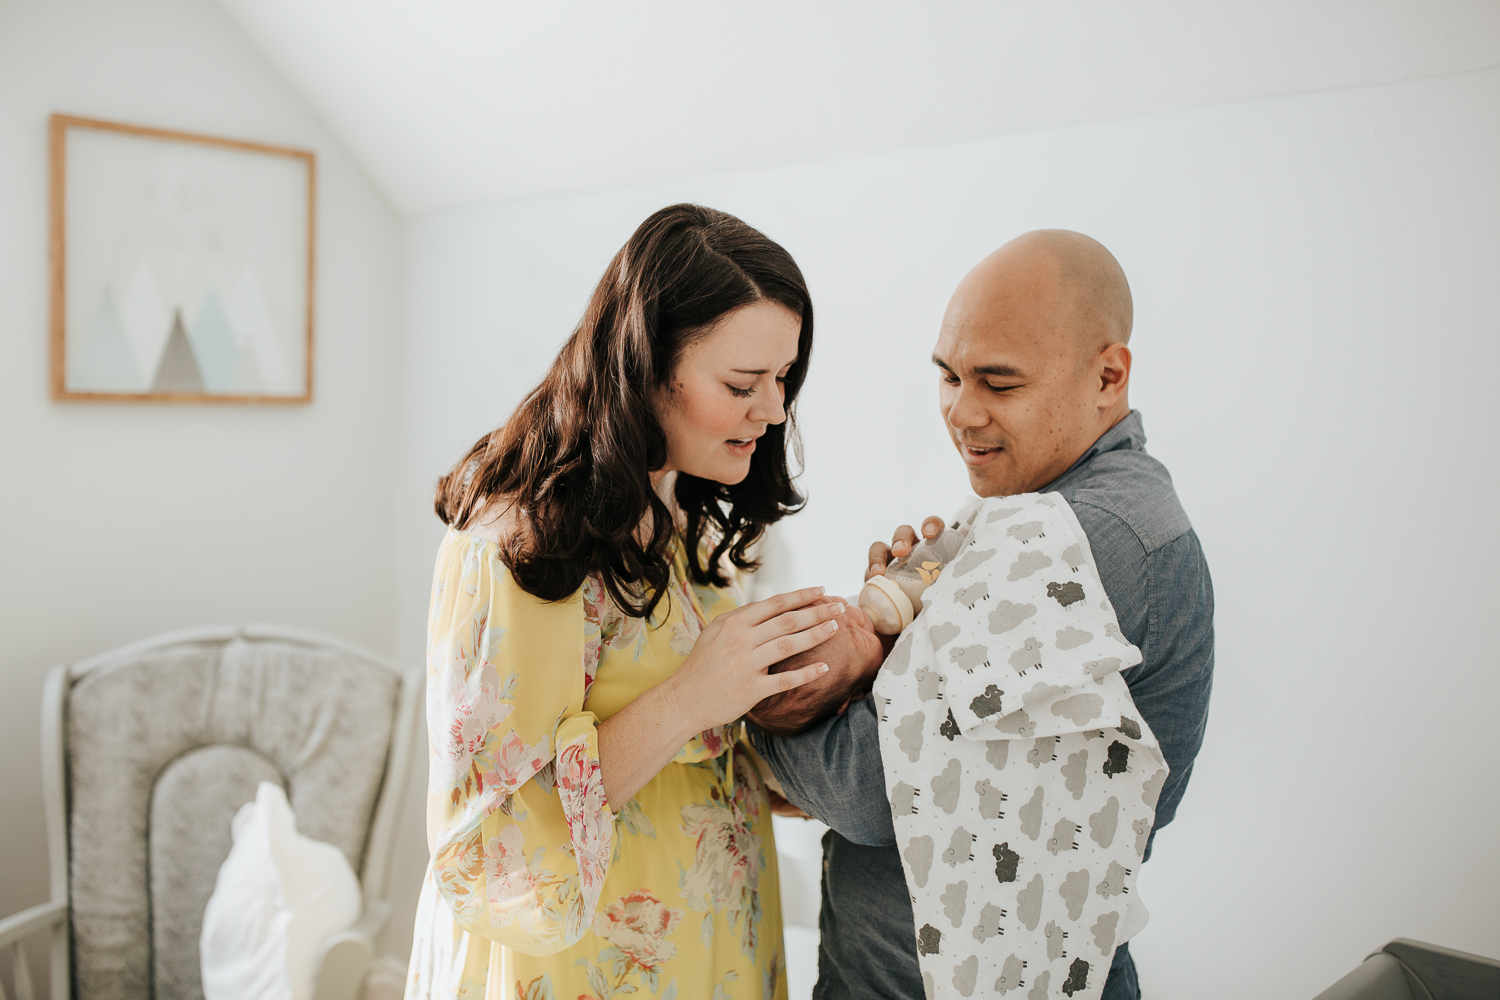 new parents standing in nursery, dad feeding 3 week old baby boy a bottle as mom stands next to them, hand on son's head - Newmarket Lifestyle Photography